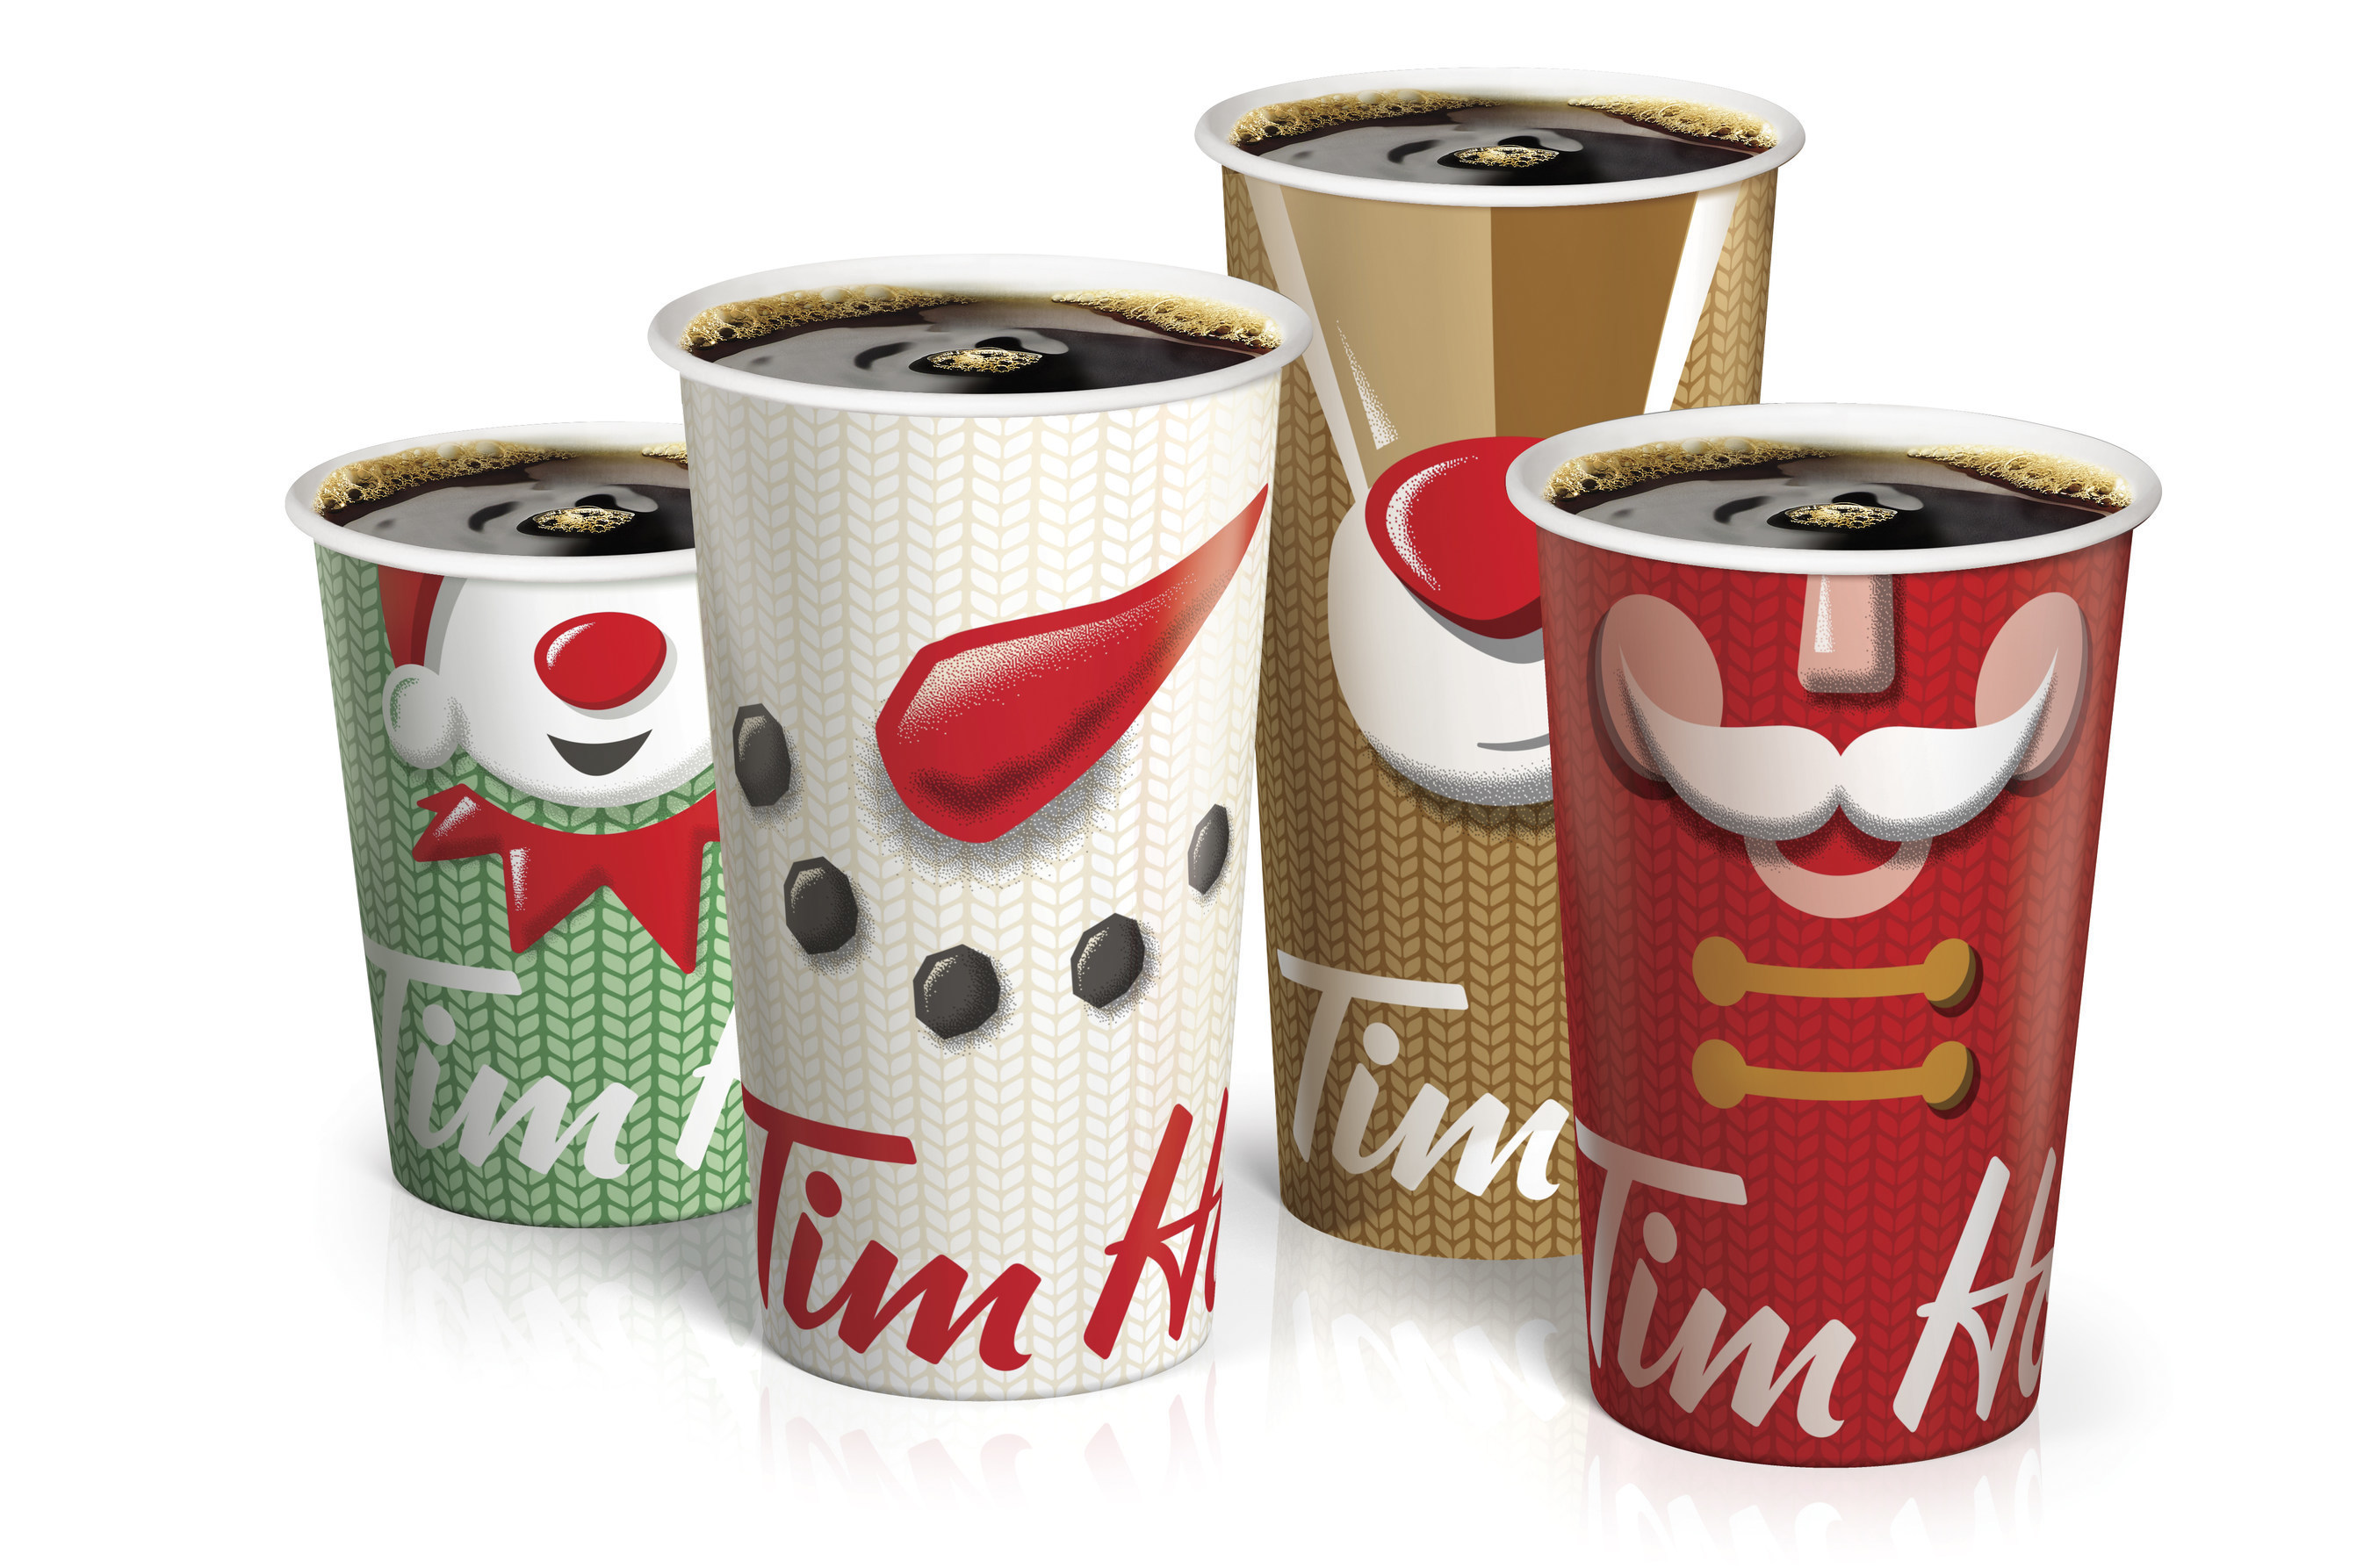 Tim Hortons changing cup sizes